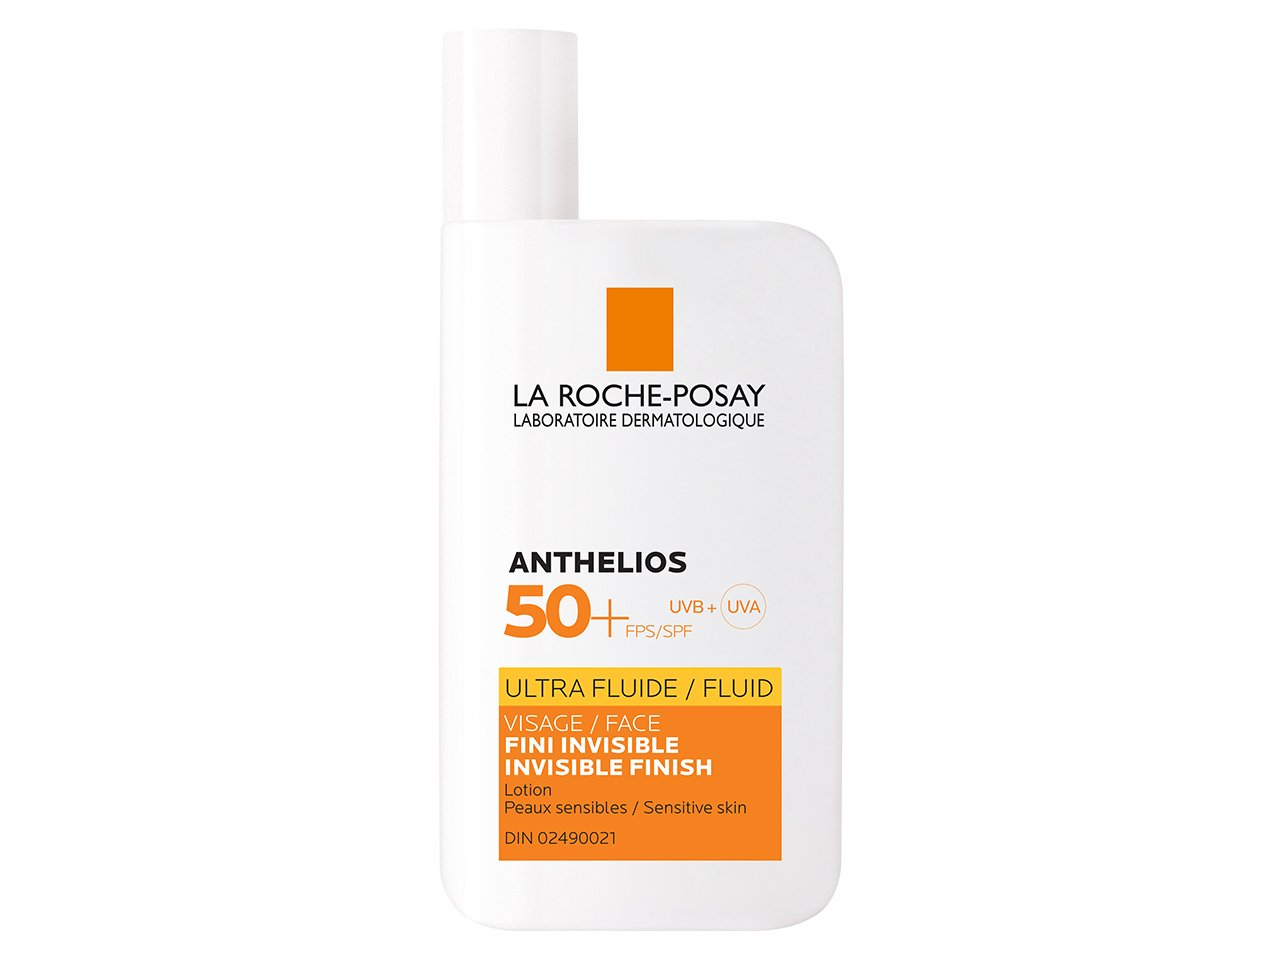 La Roche-Posay Anthelios Ultra-Fluid Face Sunscreen Lotion SPF 50